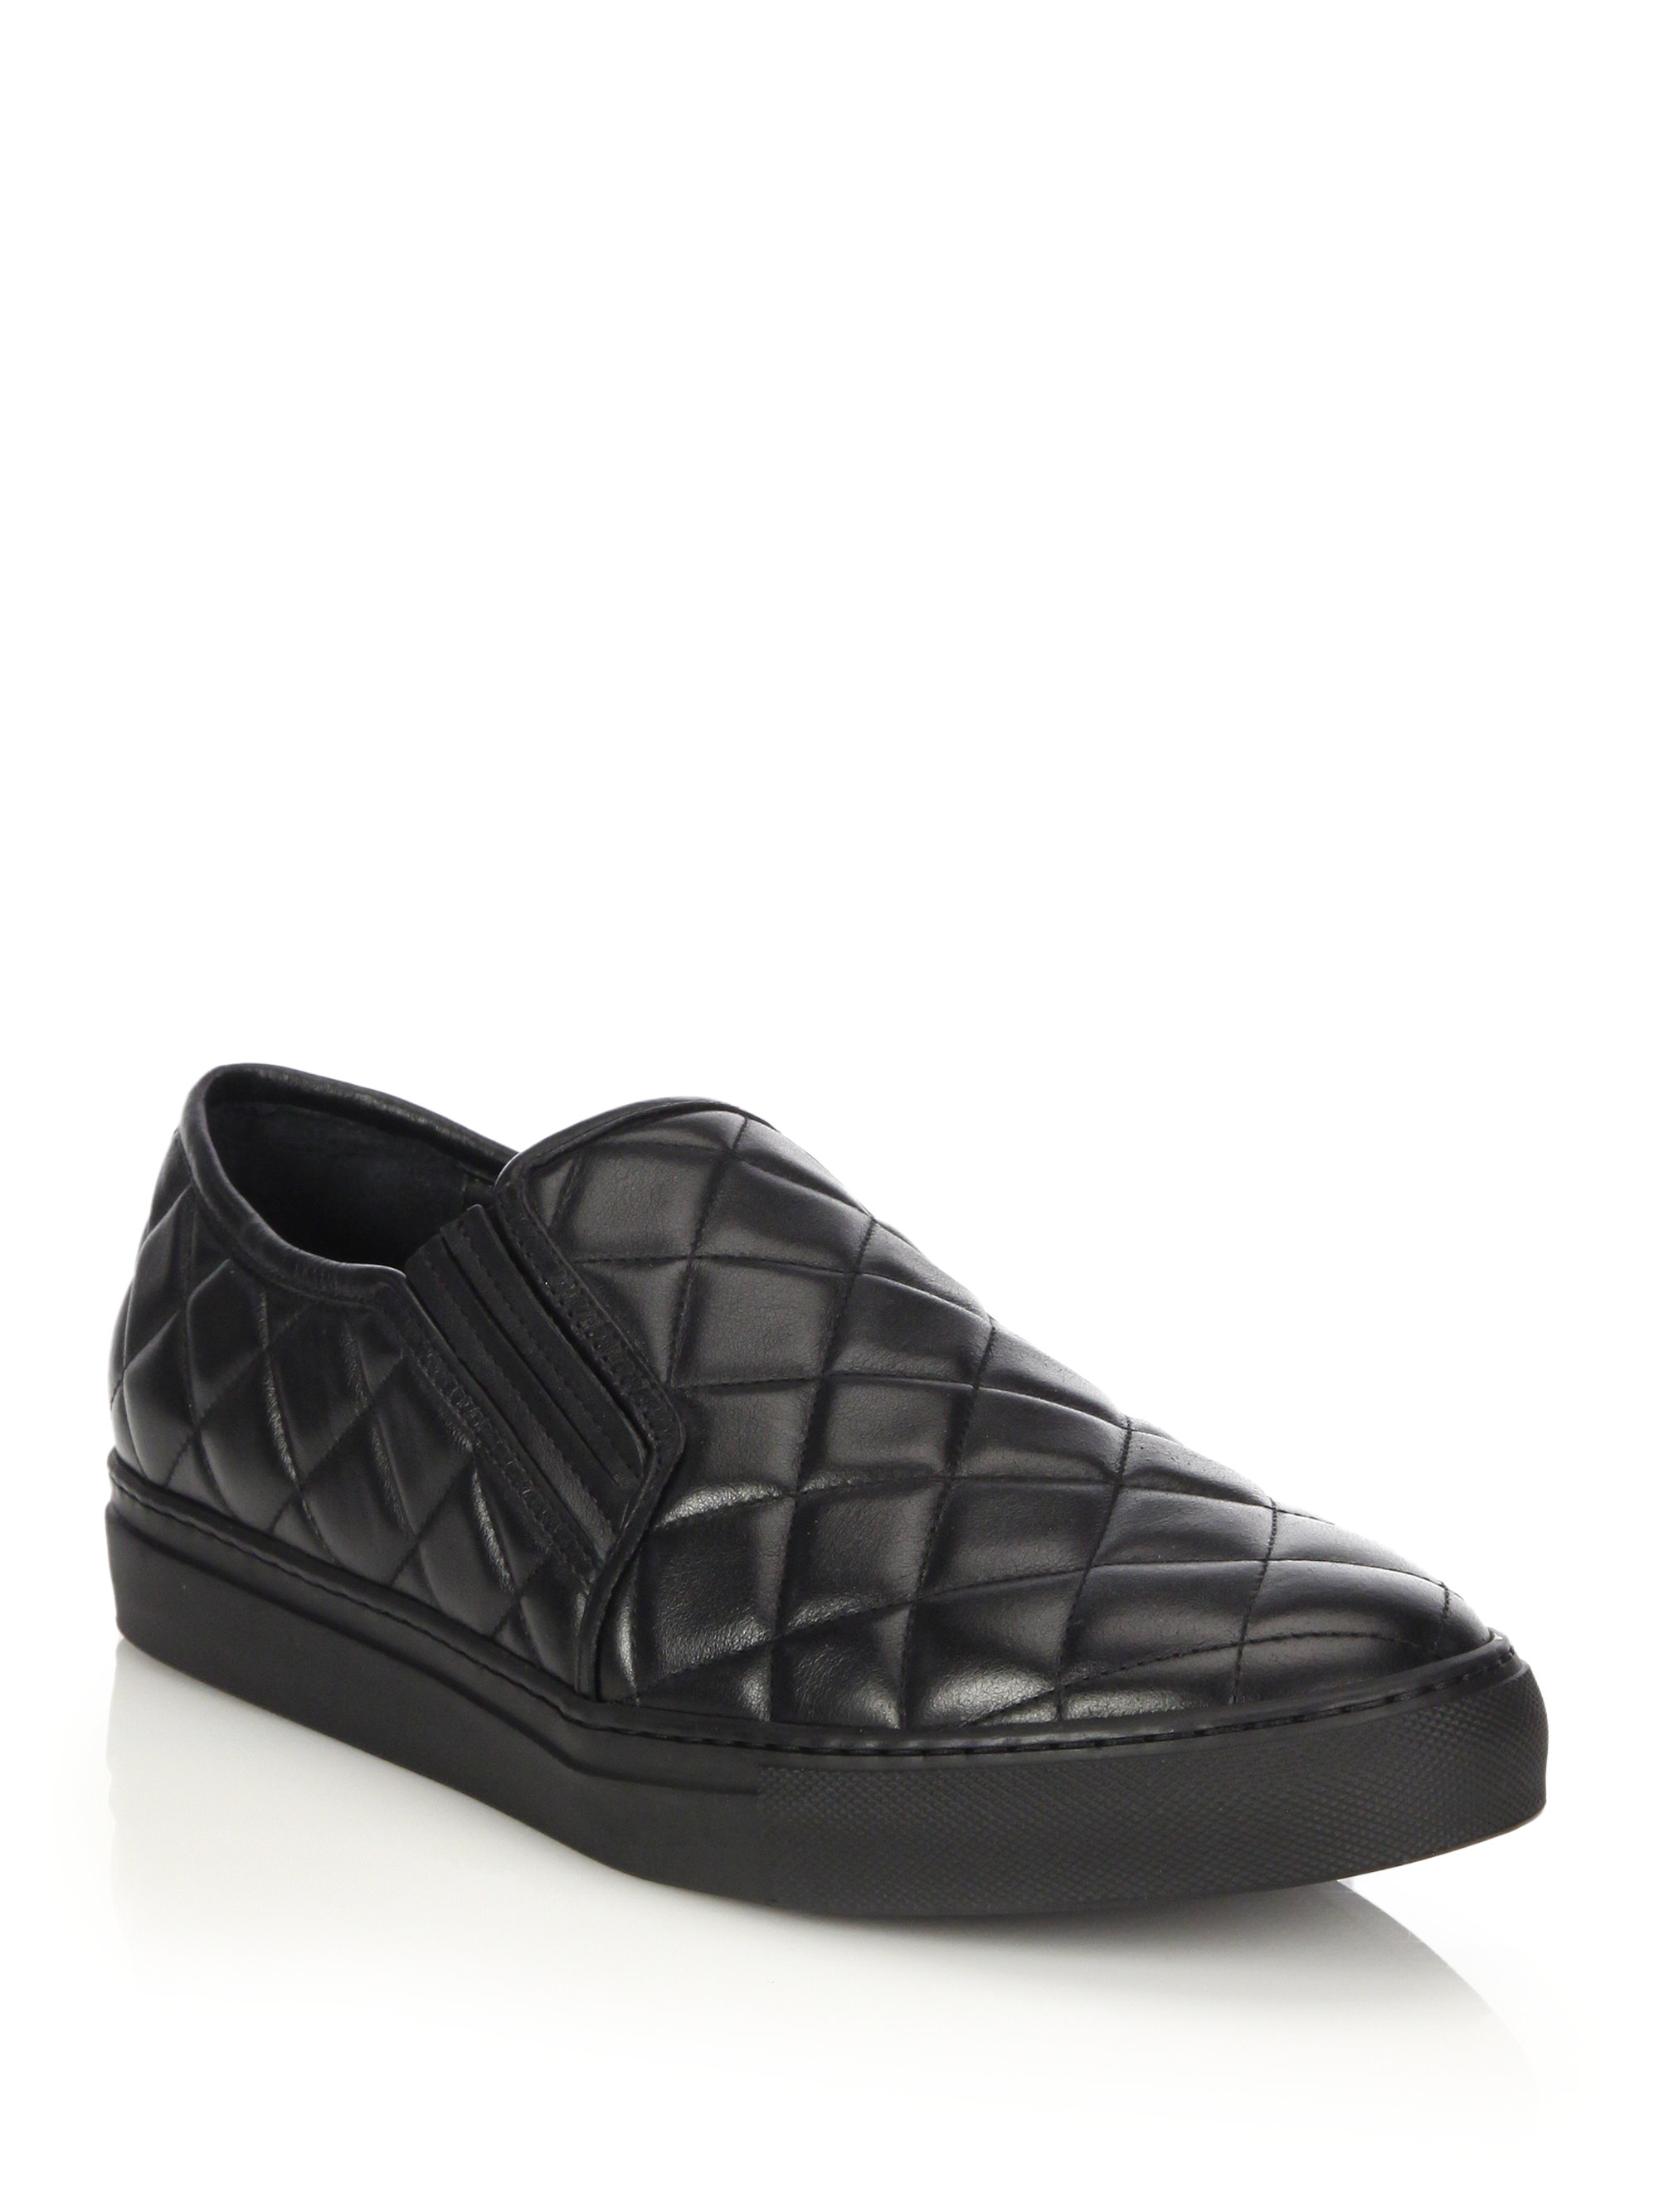 Balmain Quilted Leather Slip-on Sneakers in for Men - Lyst